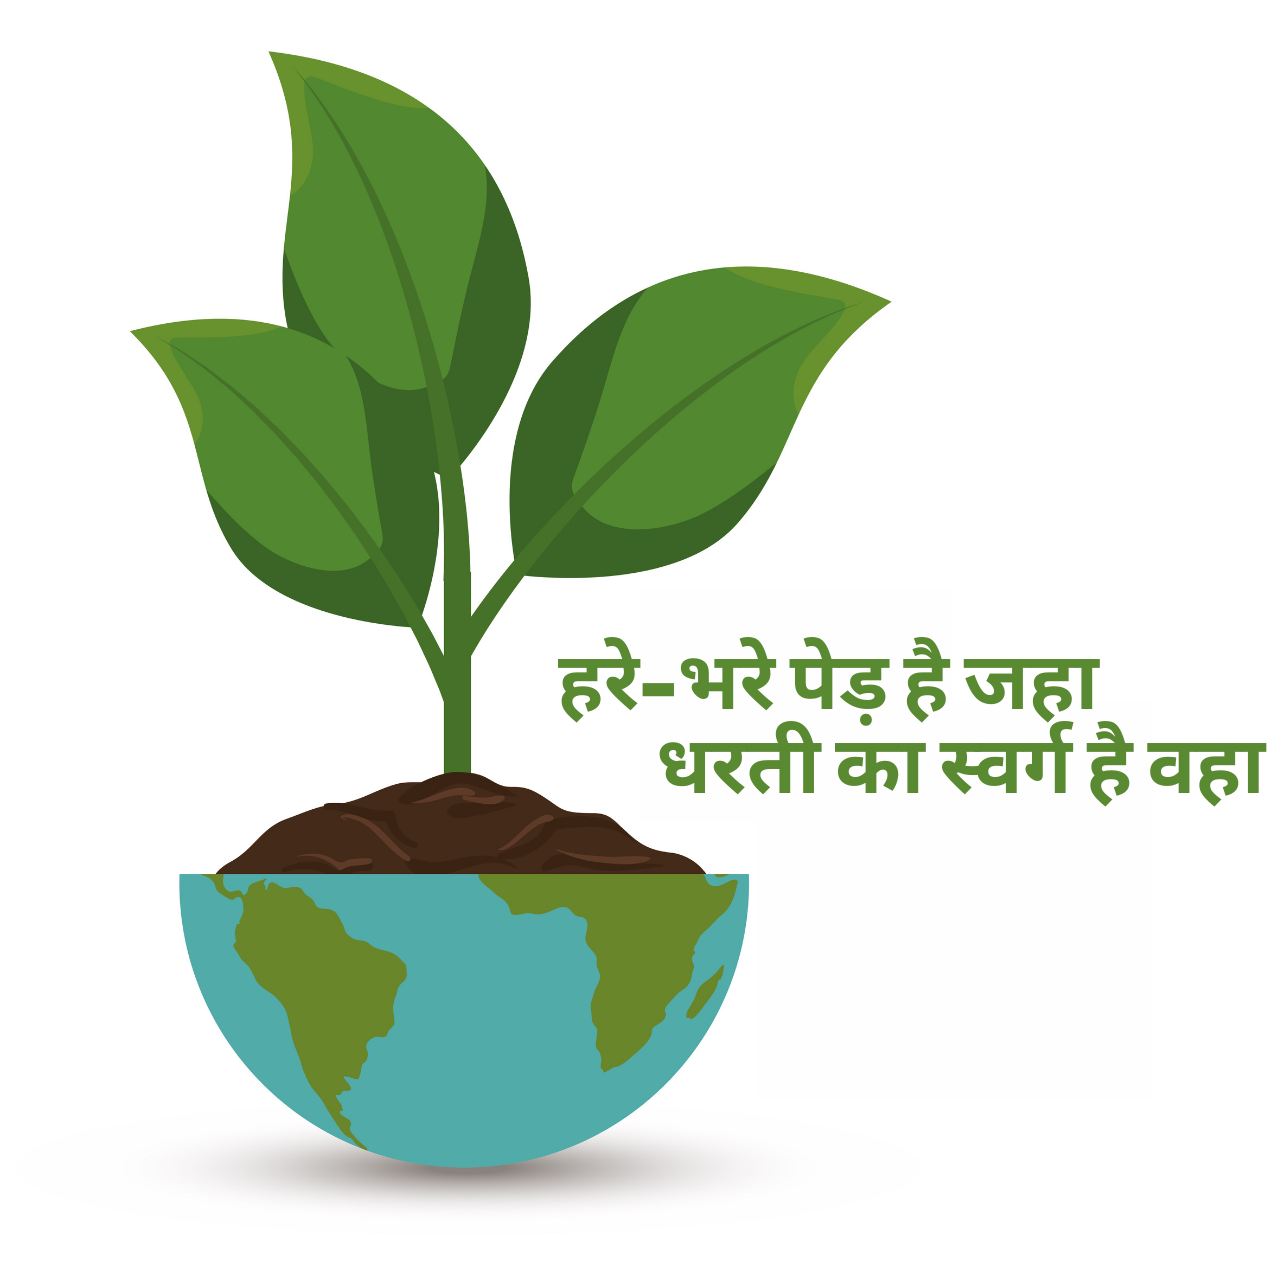 Nature Conservation Day 2021 Hindi Poster, Drawing, Quotes, Slogans, HD Images, and Status to create awareness